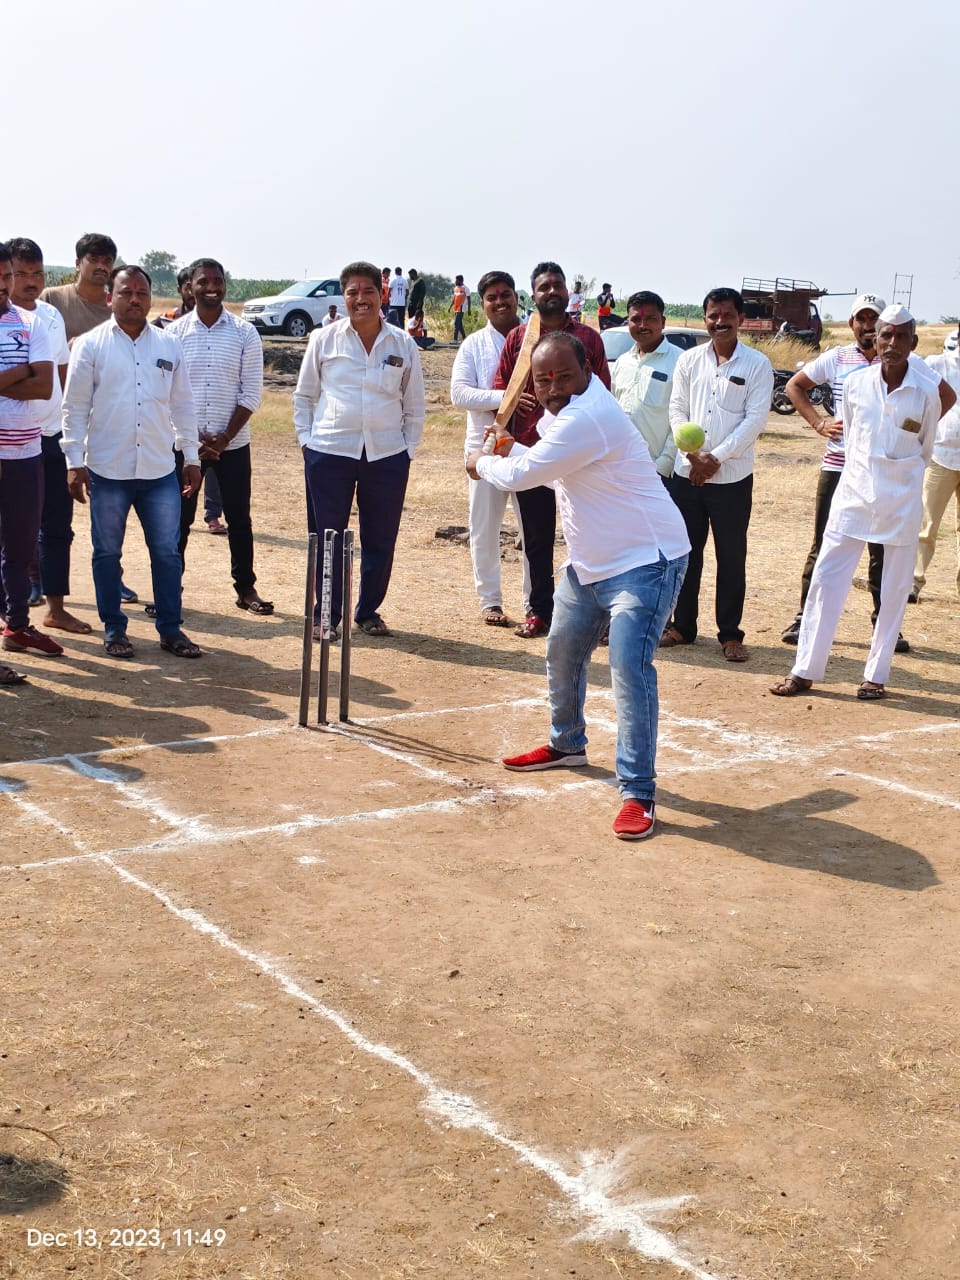 Sarpanch SubSarpanch Cup Cricket Tournament on the occasion of Shree Khandeshwar Yatra in Nimbhore